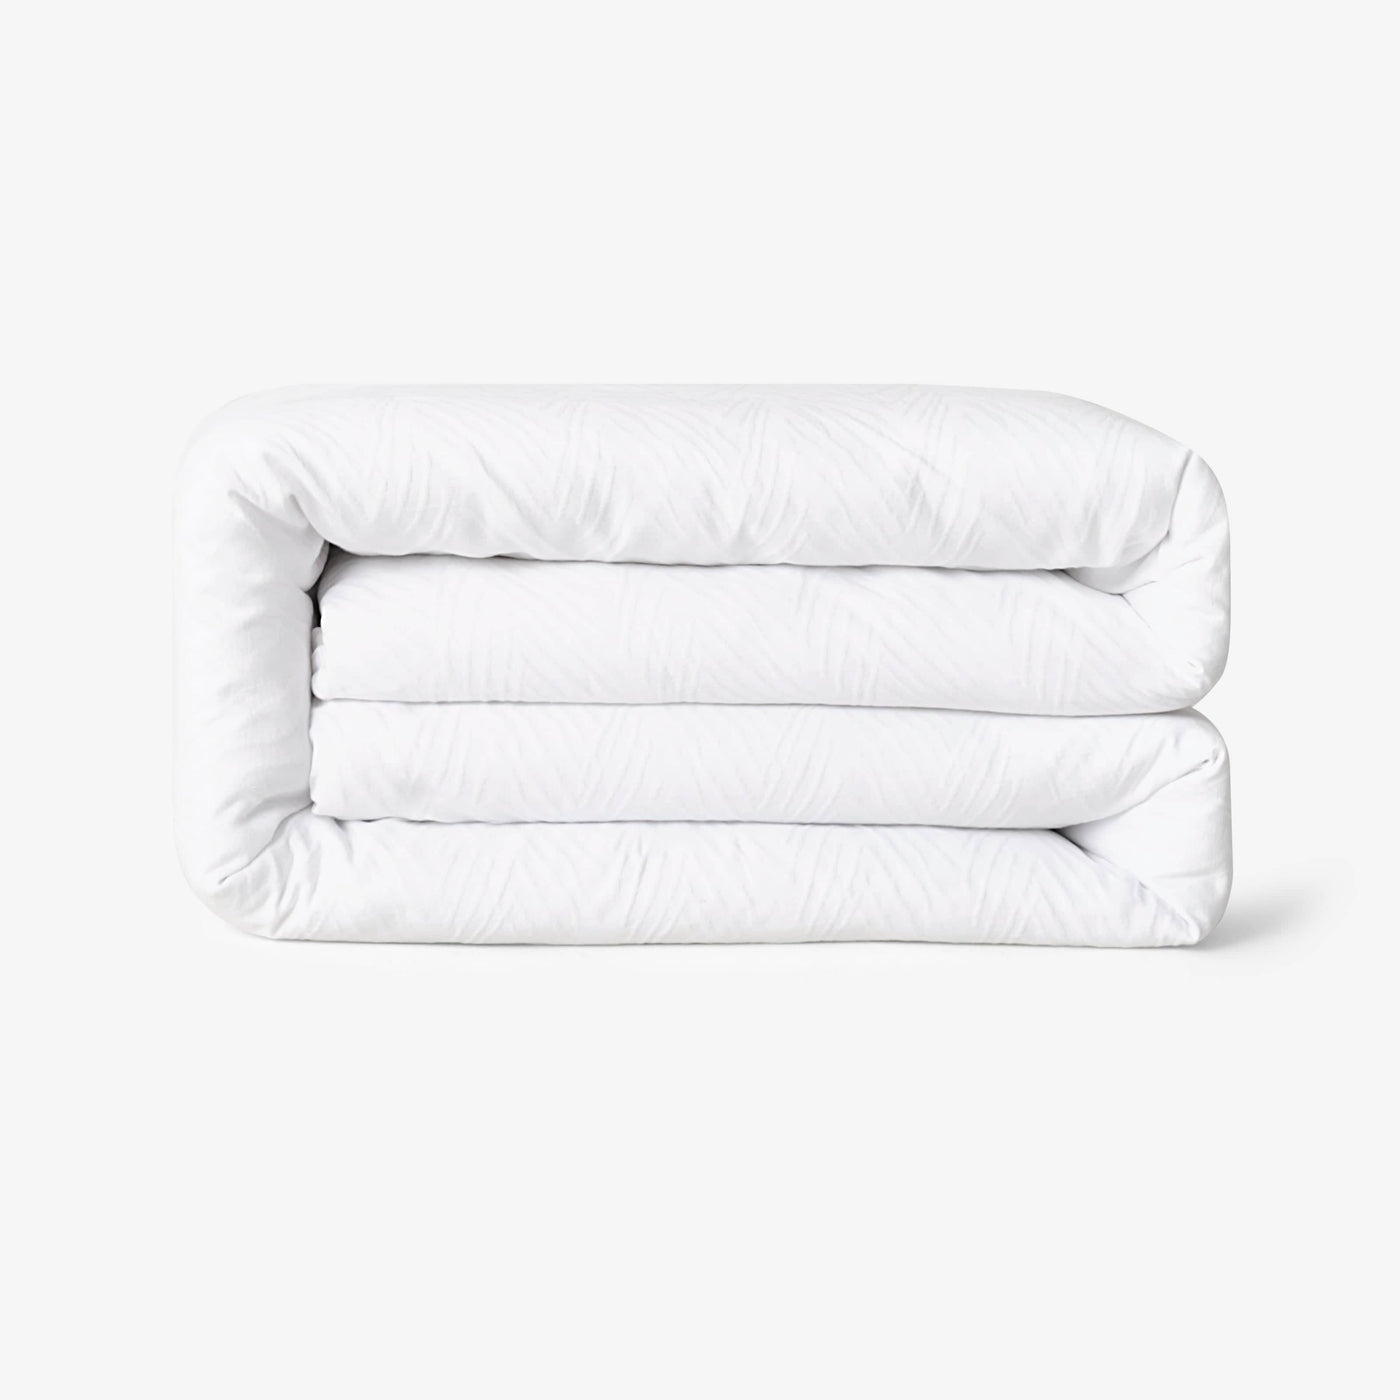 Freddie 100% Turkish Cotton Jacquard 300 TC Duvet Cover Set + Fitted Sheet, White, Double Size 3